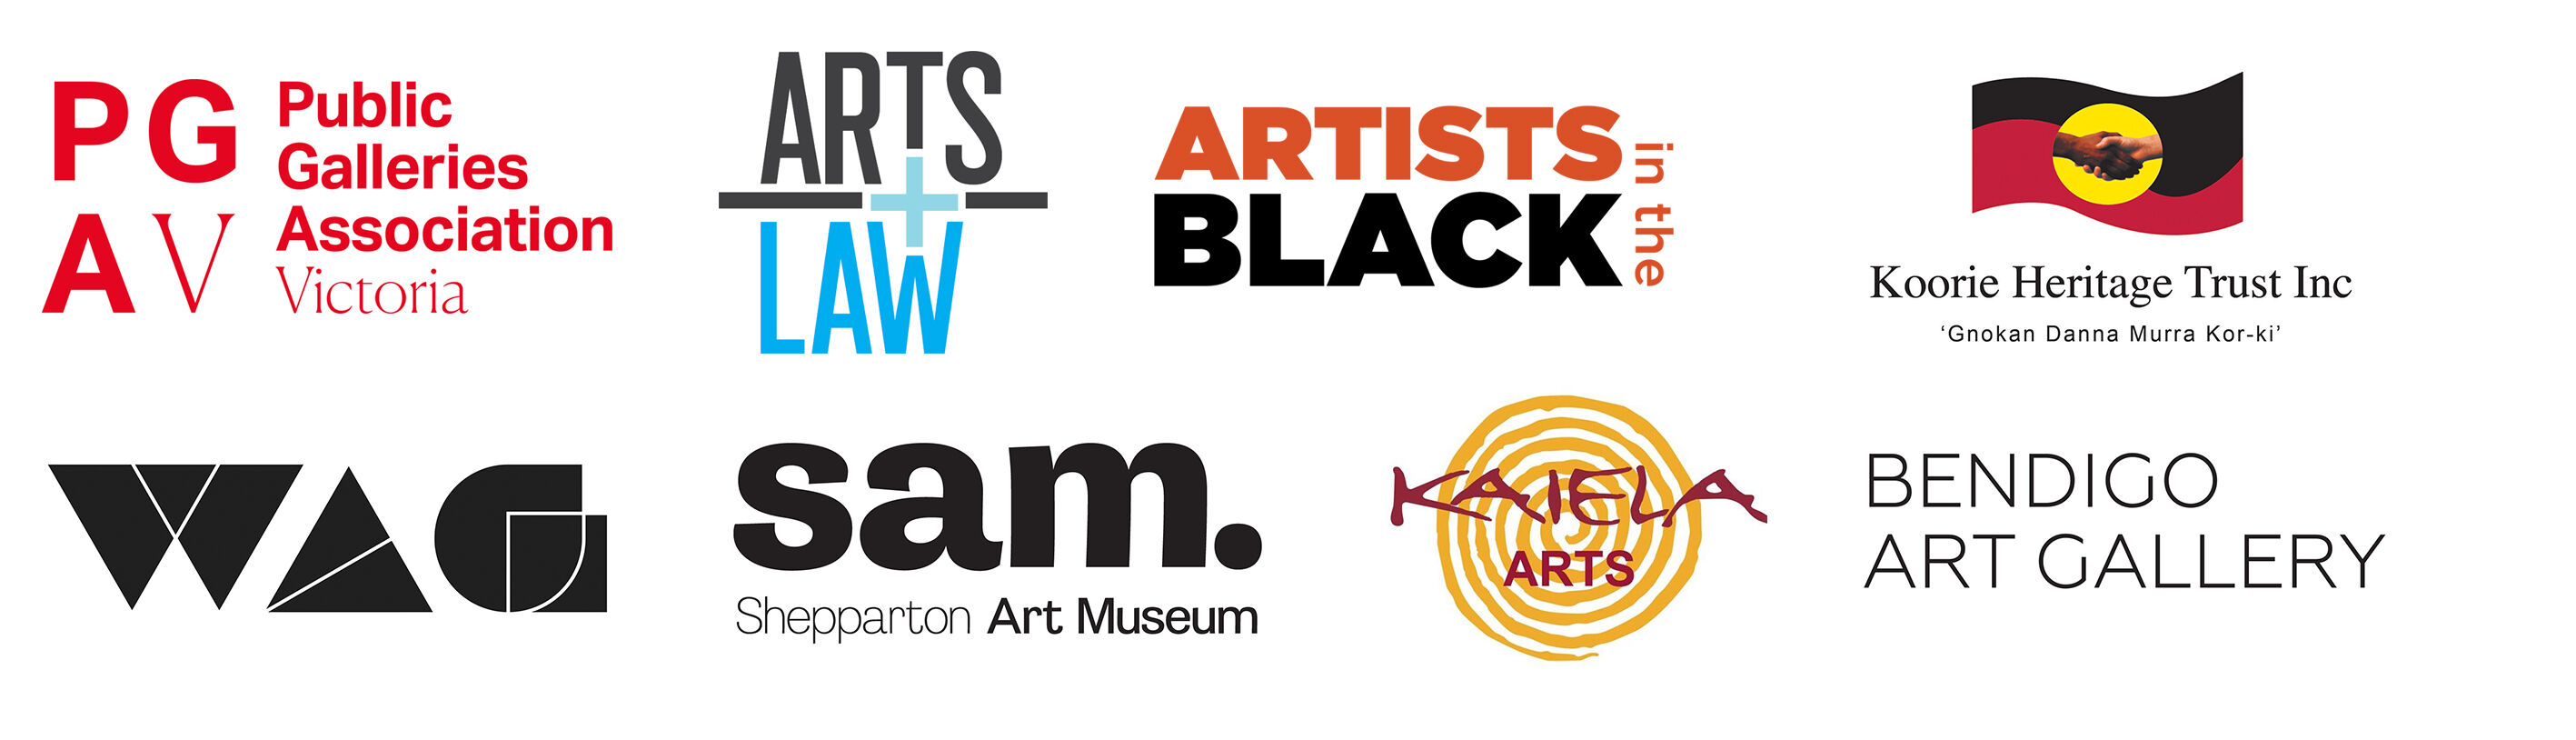 Artists in the Black Presenting Partners